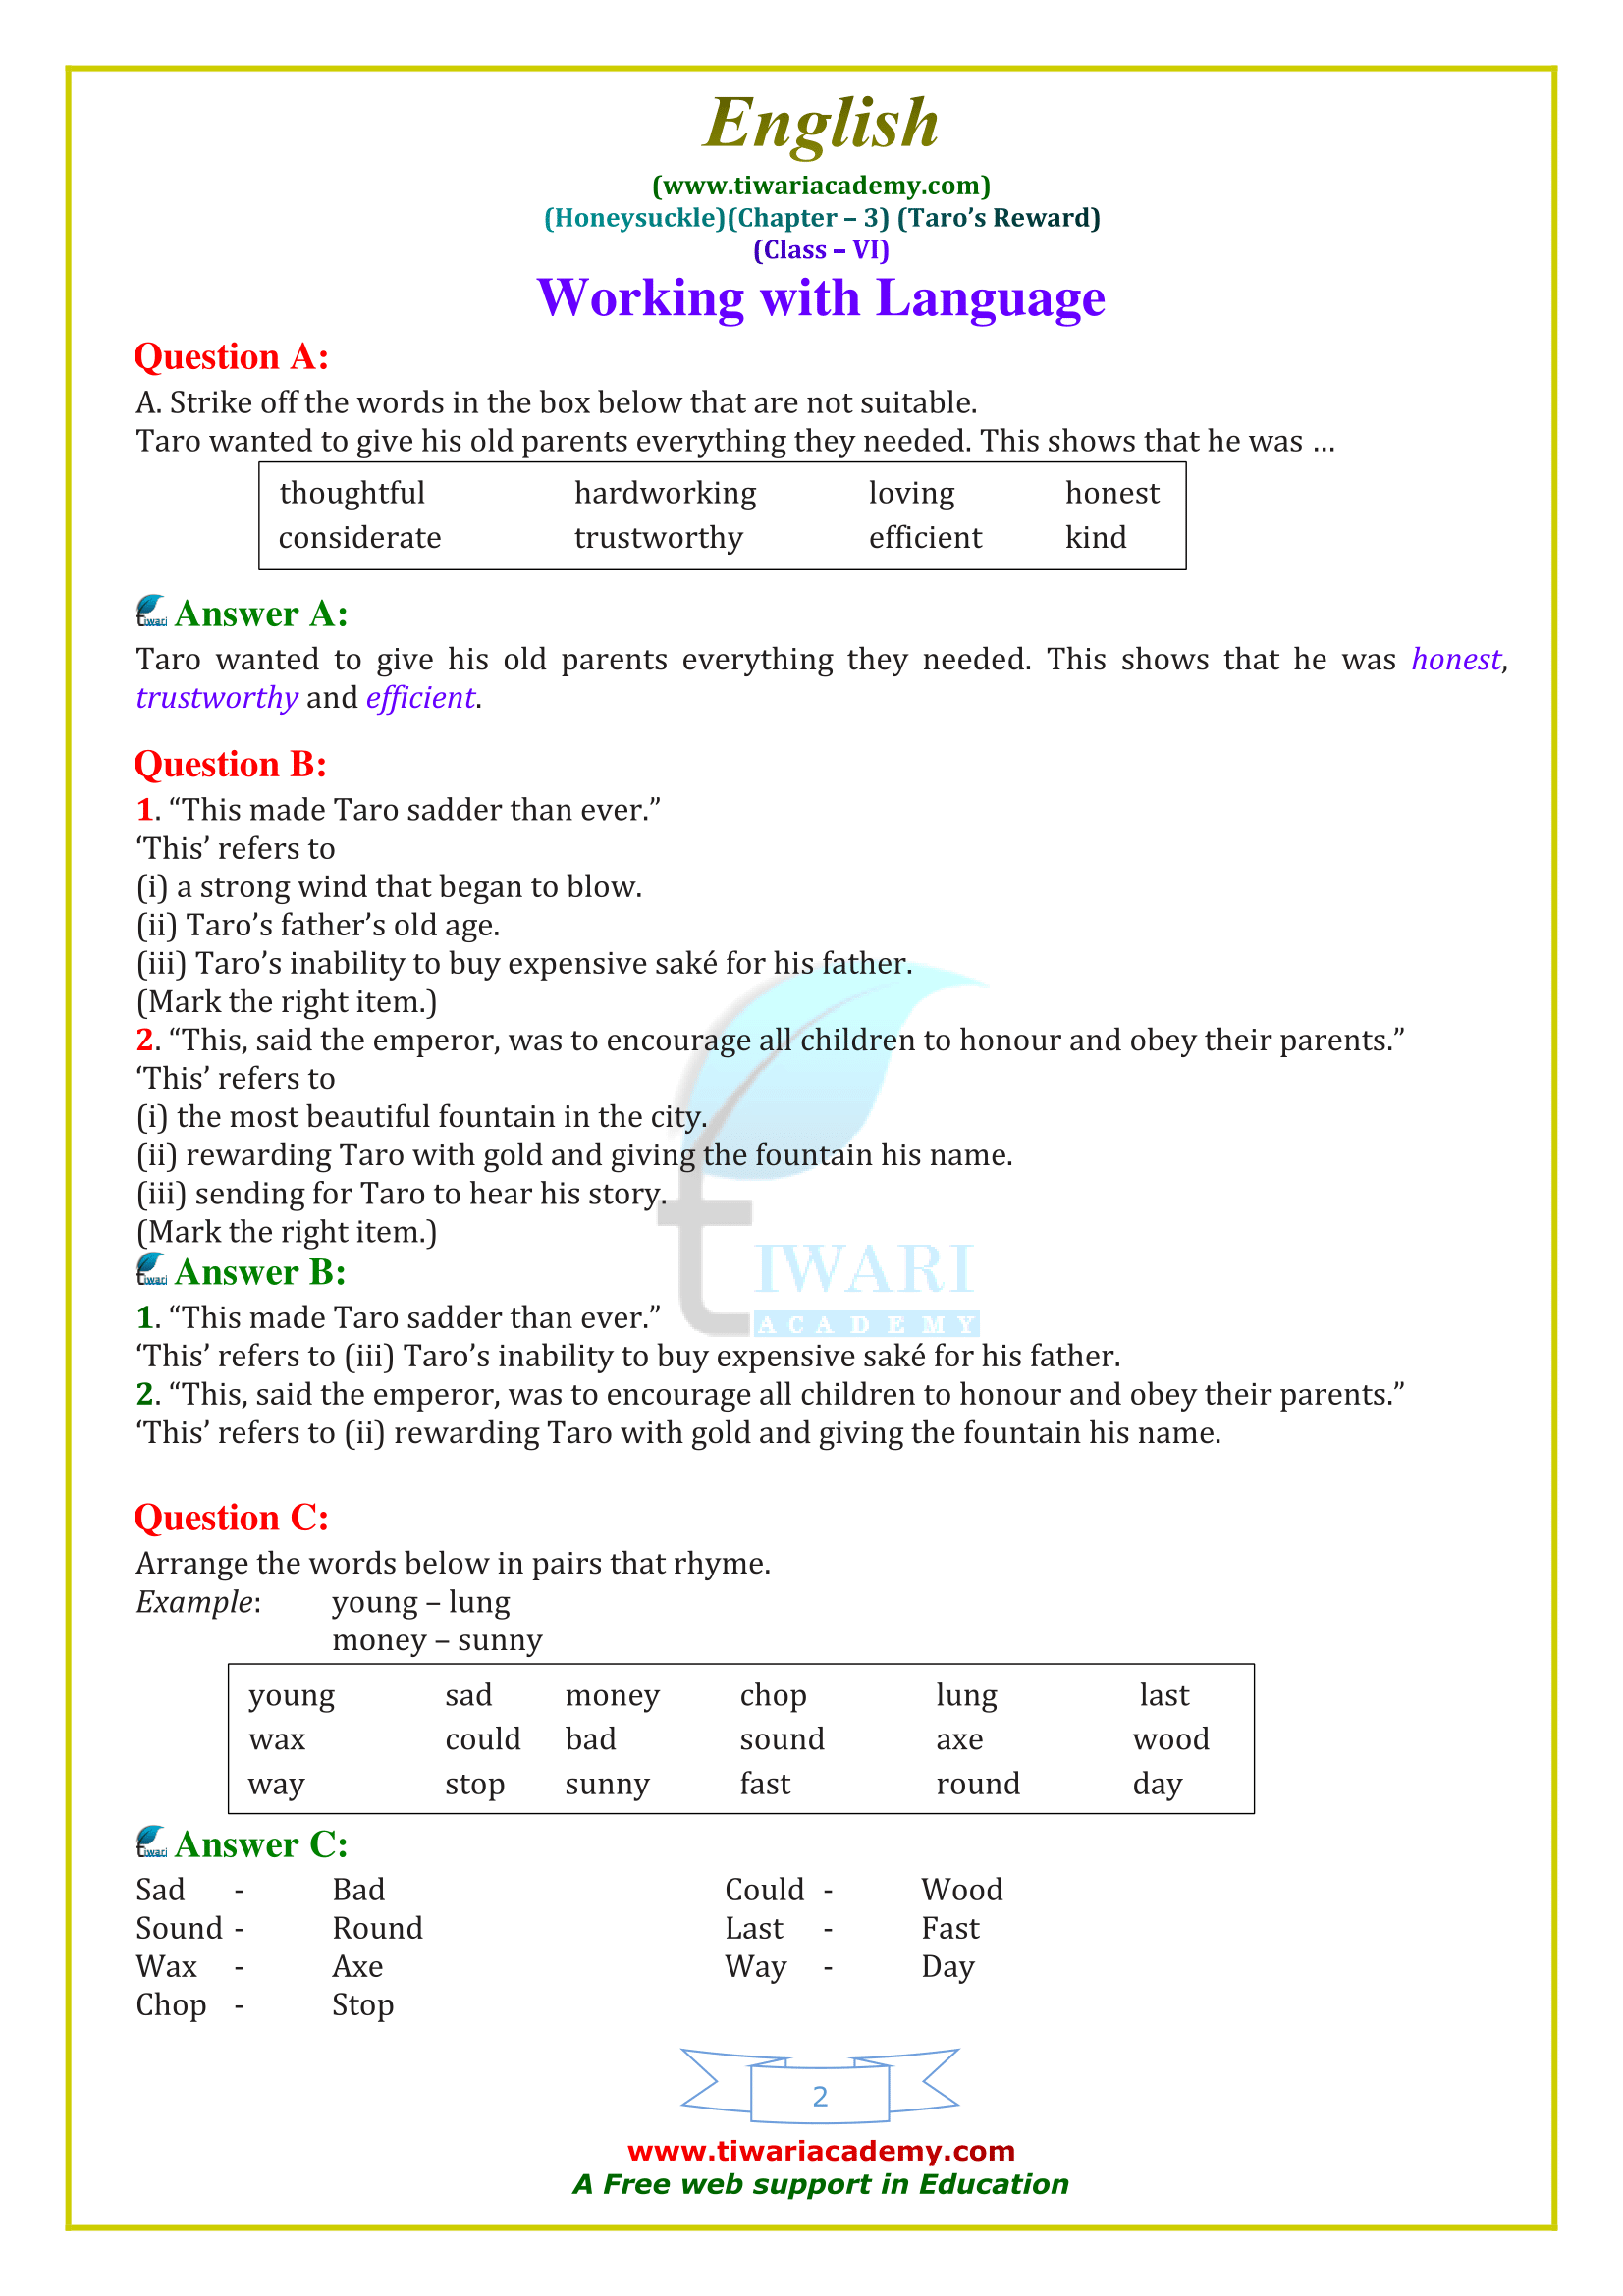 NCERT Solutions for Class 6 English Honeysuckle Chapter 3 in PDF